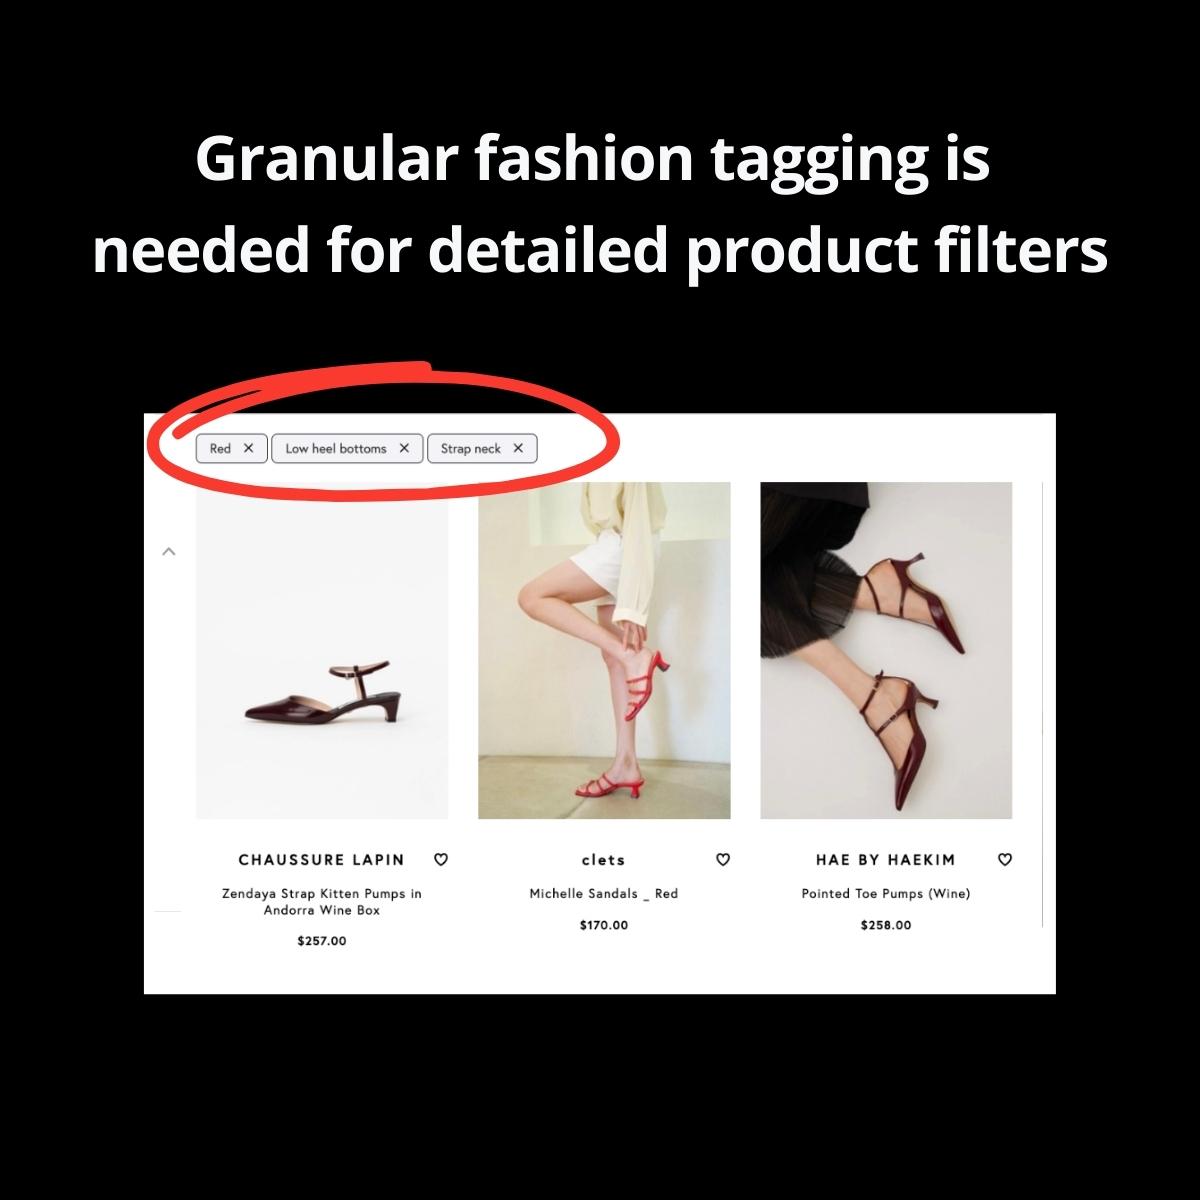 Granular fashion tagging example against black background